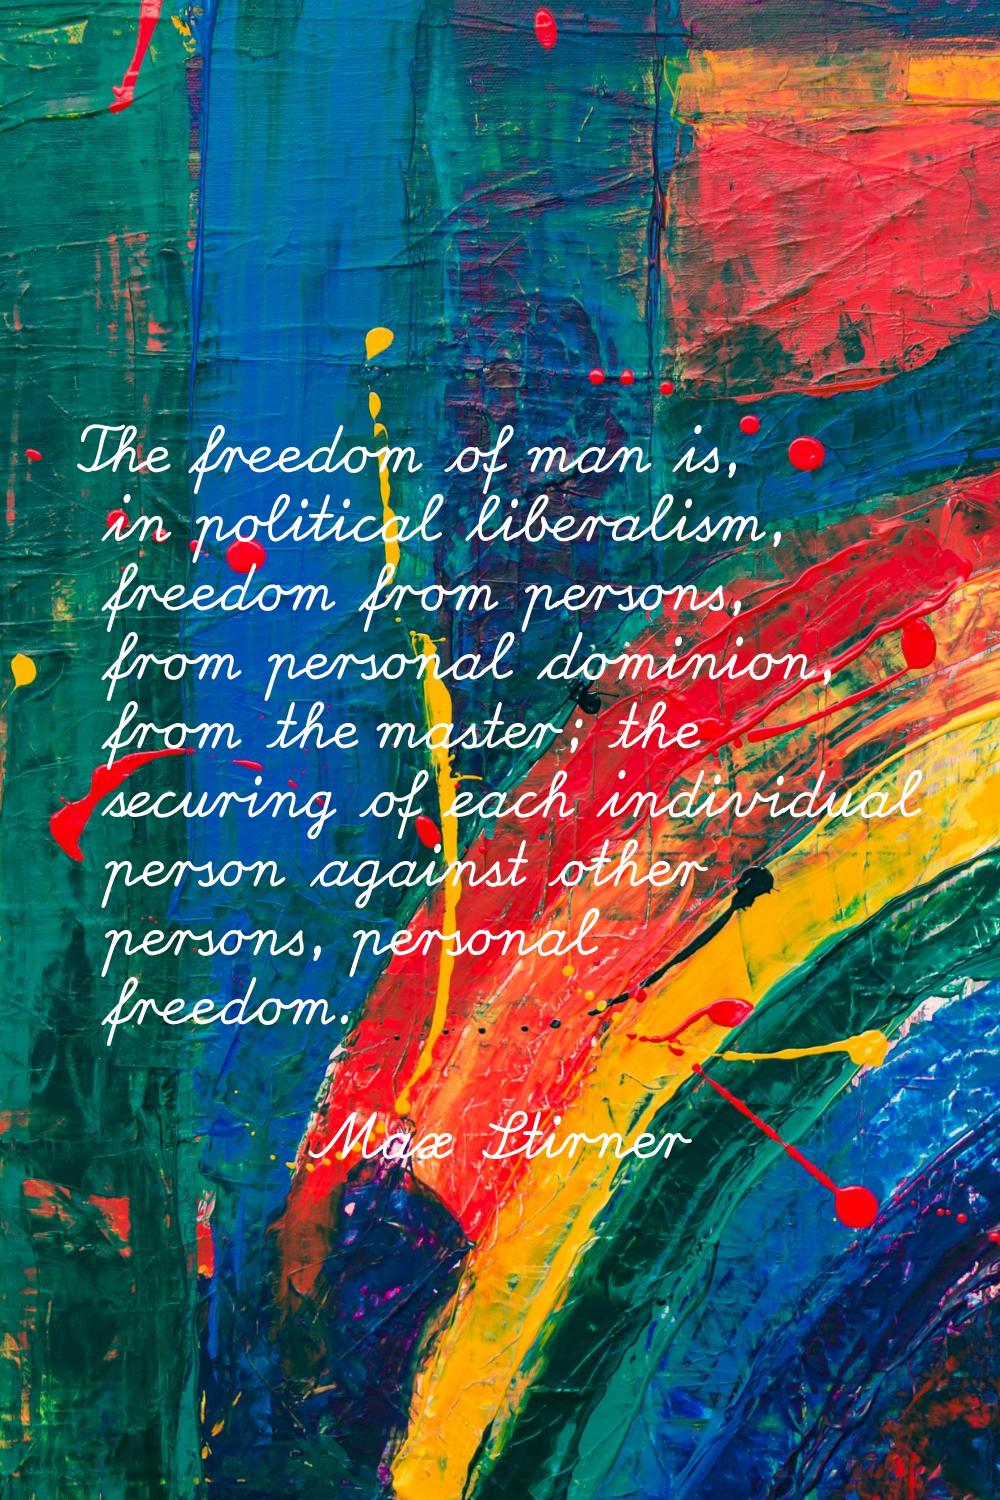 The freedom of man is, in political liberalism, freedom from persons, from personal dominion, from 